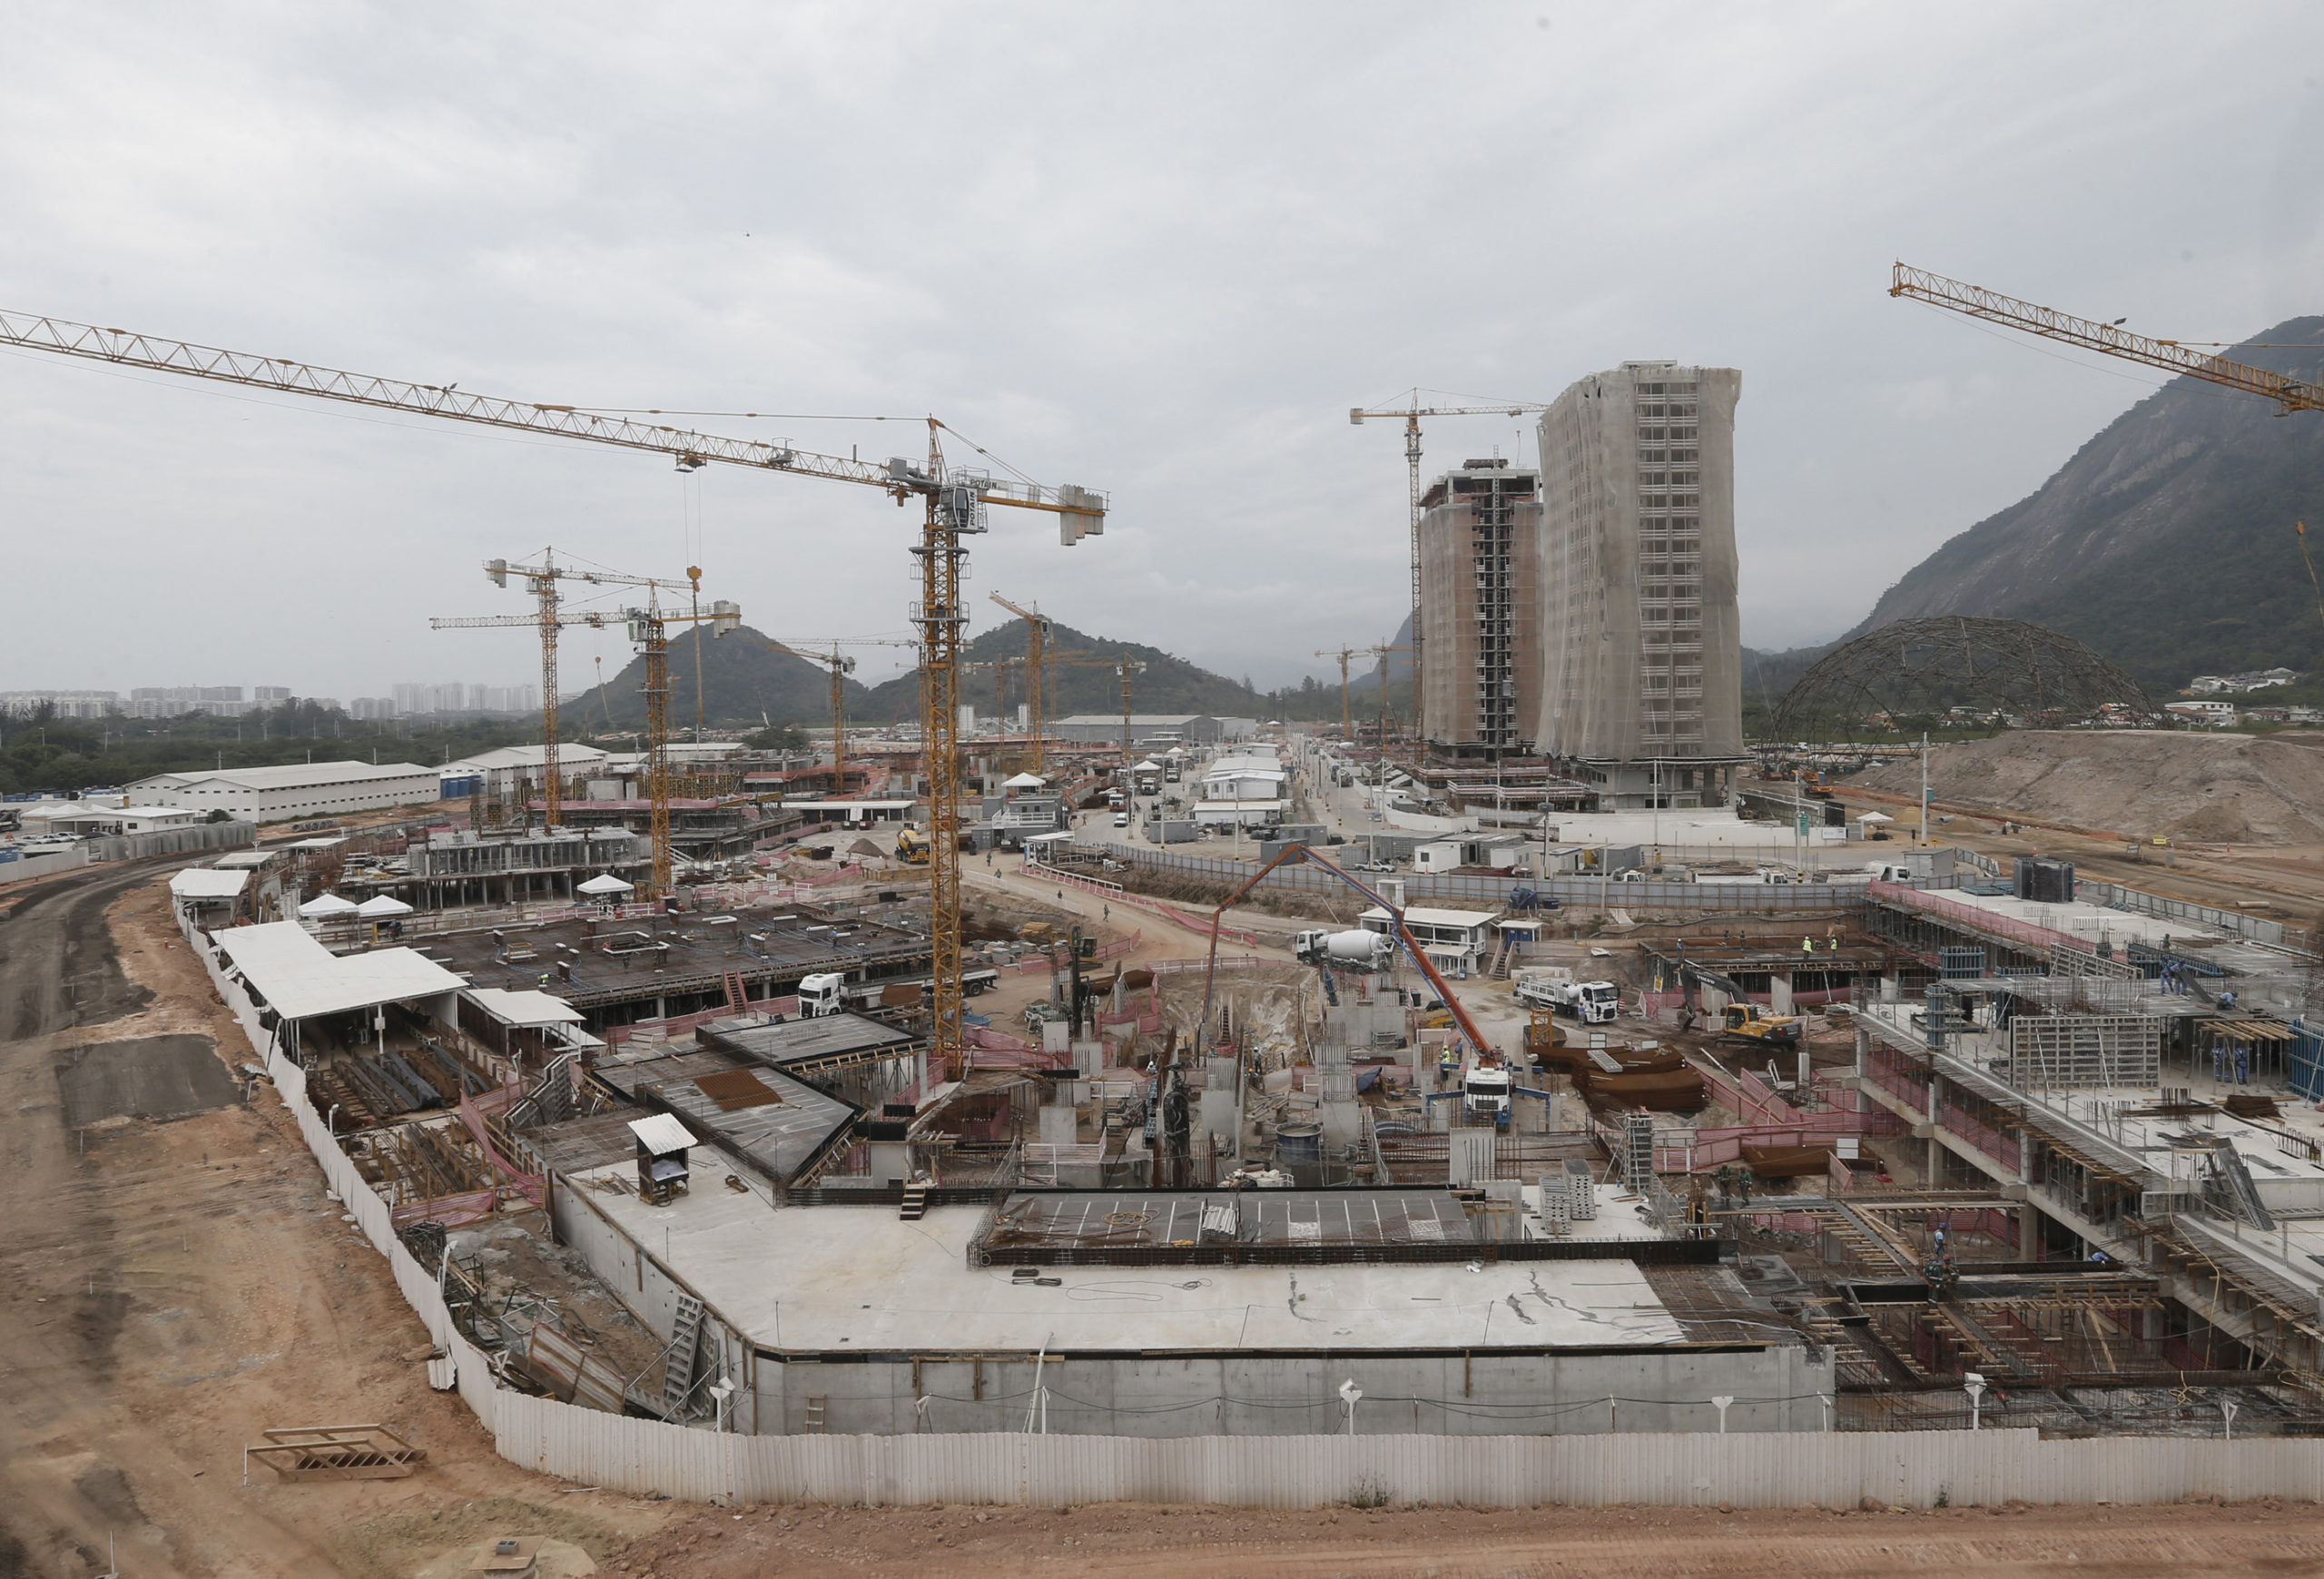 Rio’s Olympic Construction Crews Are Unearthing Its Slave Trade Past